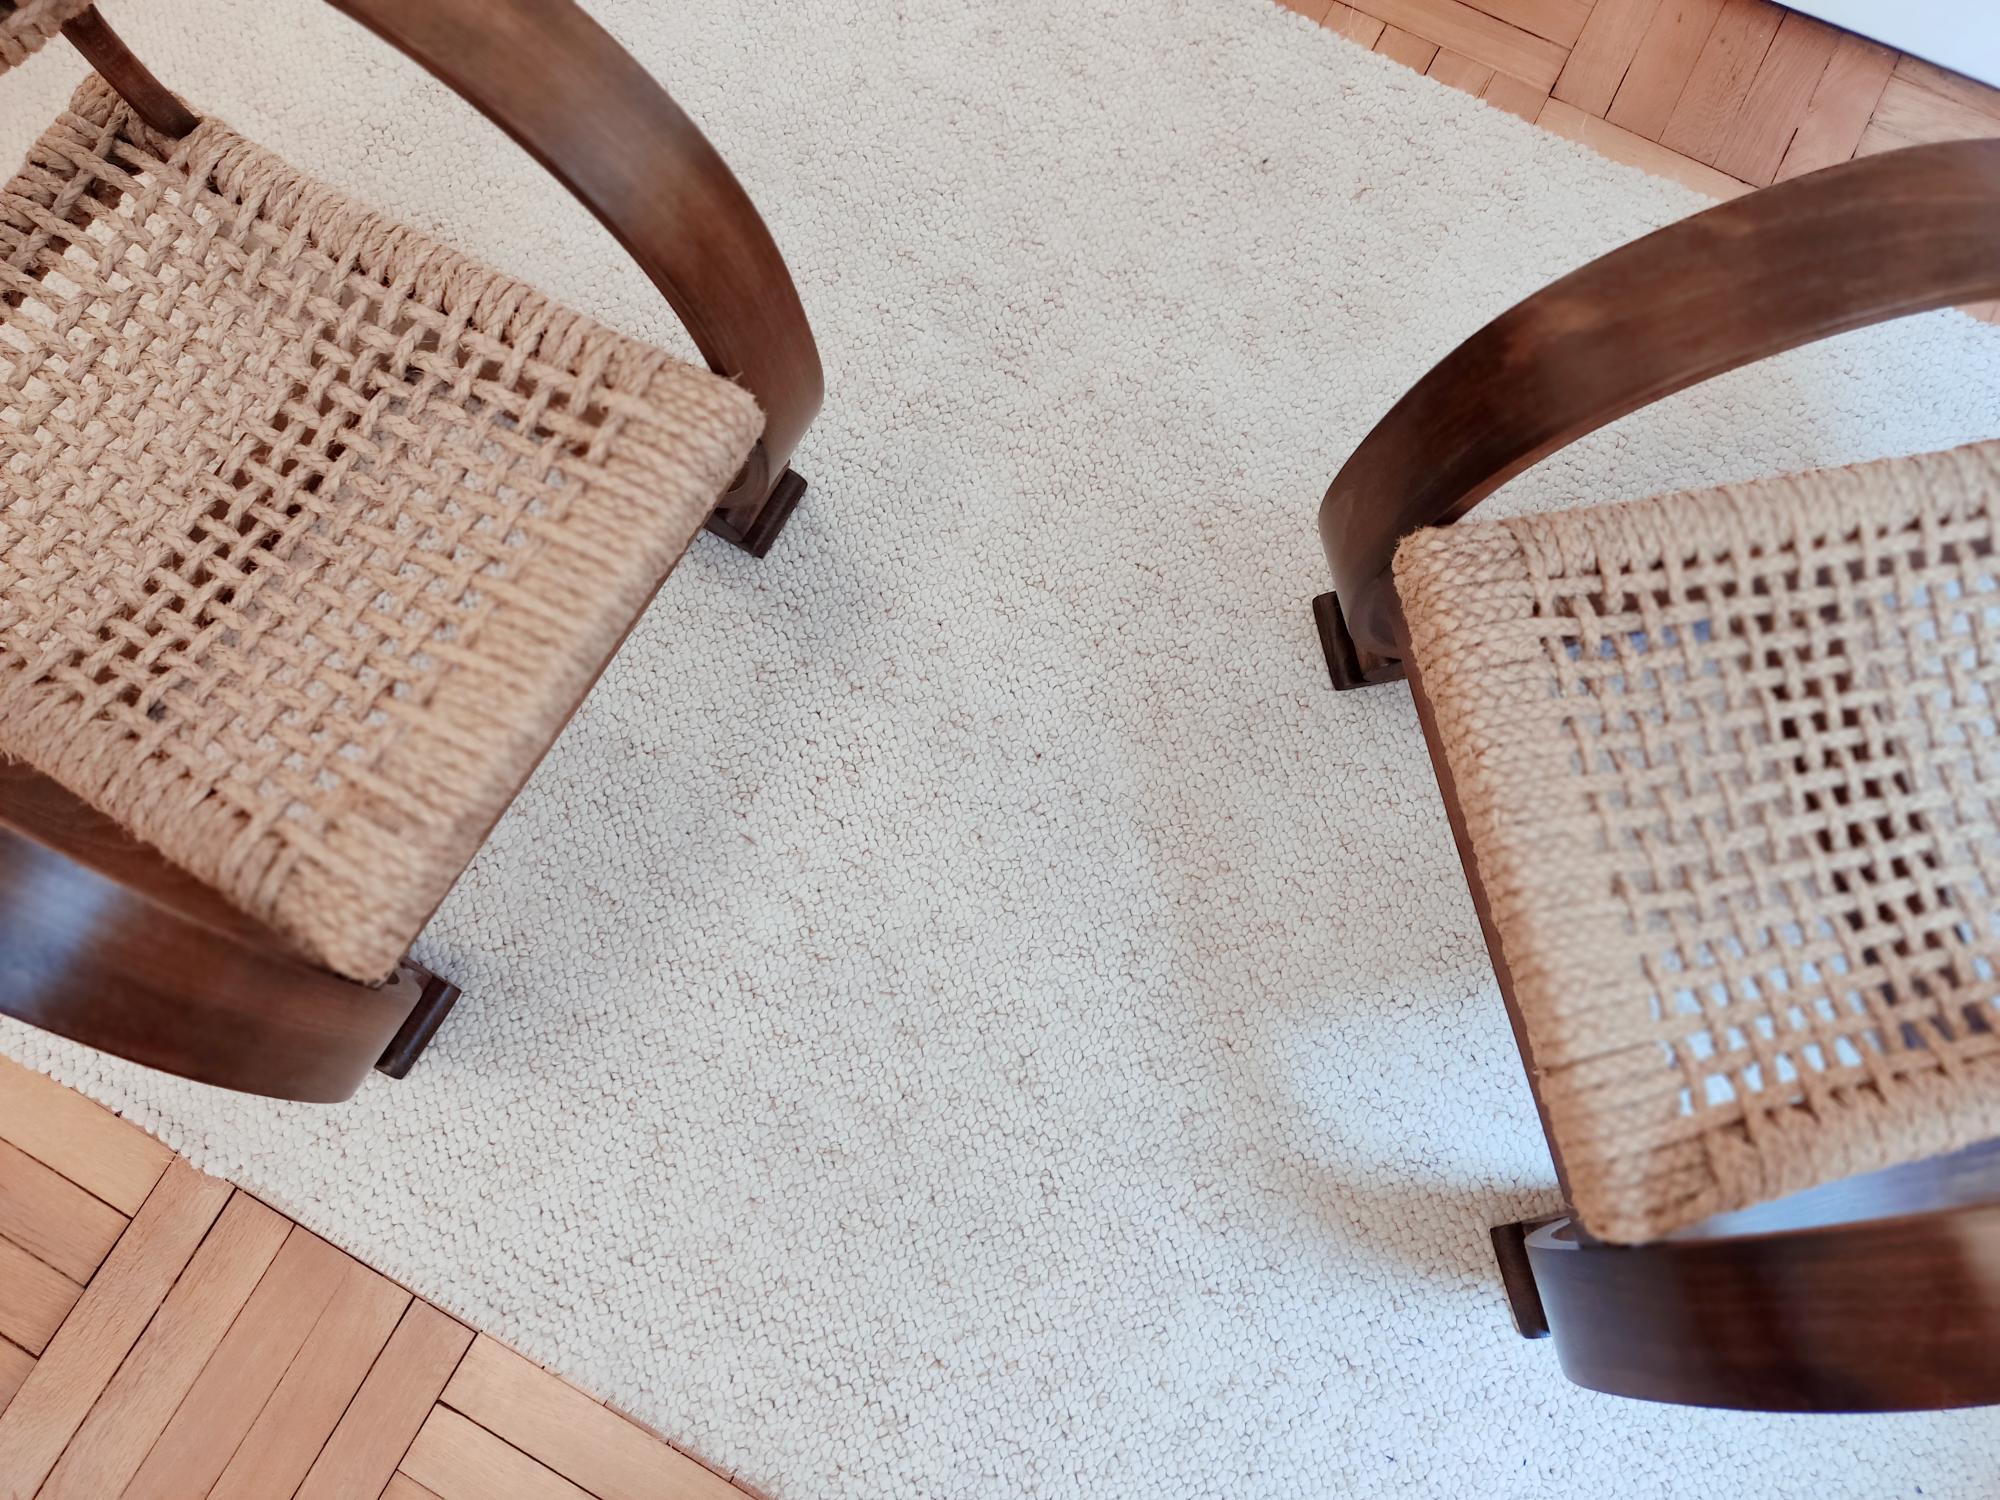 Pair of armchairs by Adrien Audoux & Frida Minet, in beech wood and rope. French, circa 1950. The rounded shapes will give many styles to your interior.
Each armchair is unique and artisanal. The dimensions differ slightly with more plunging